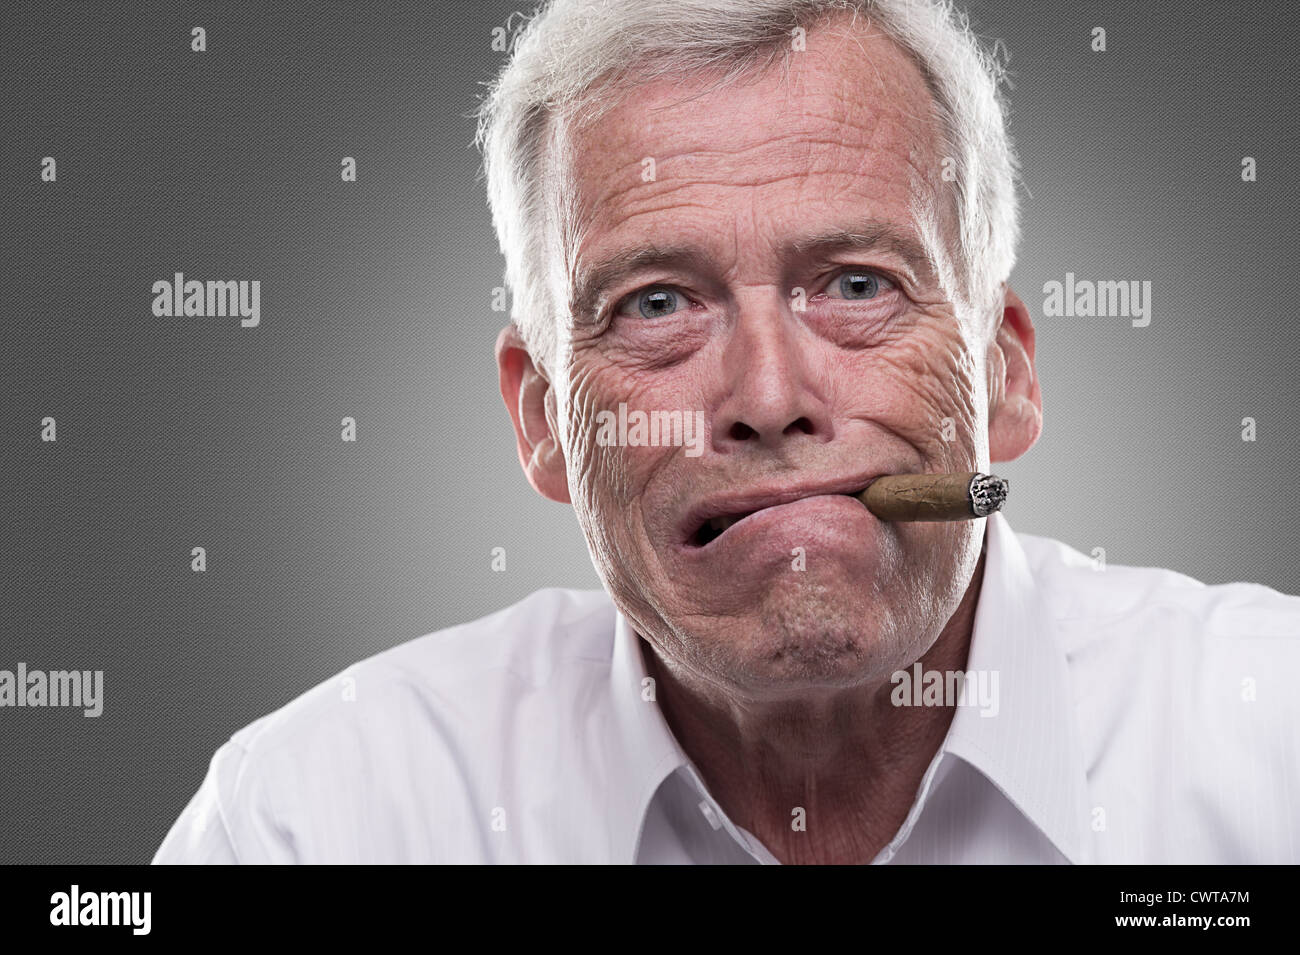 Studio shot of puzzled senior man with cigar in his mouth Stock Photo